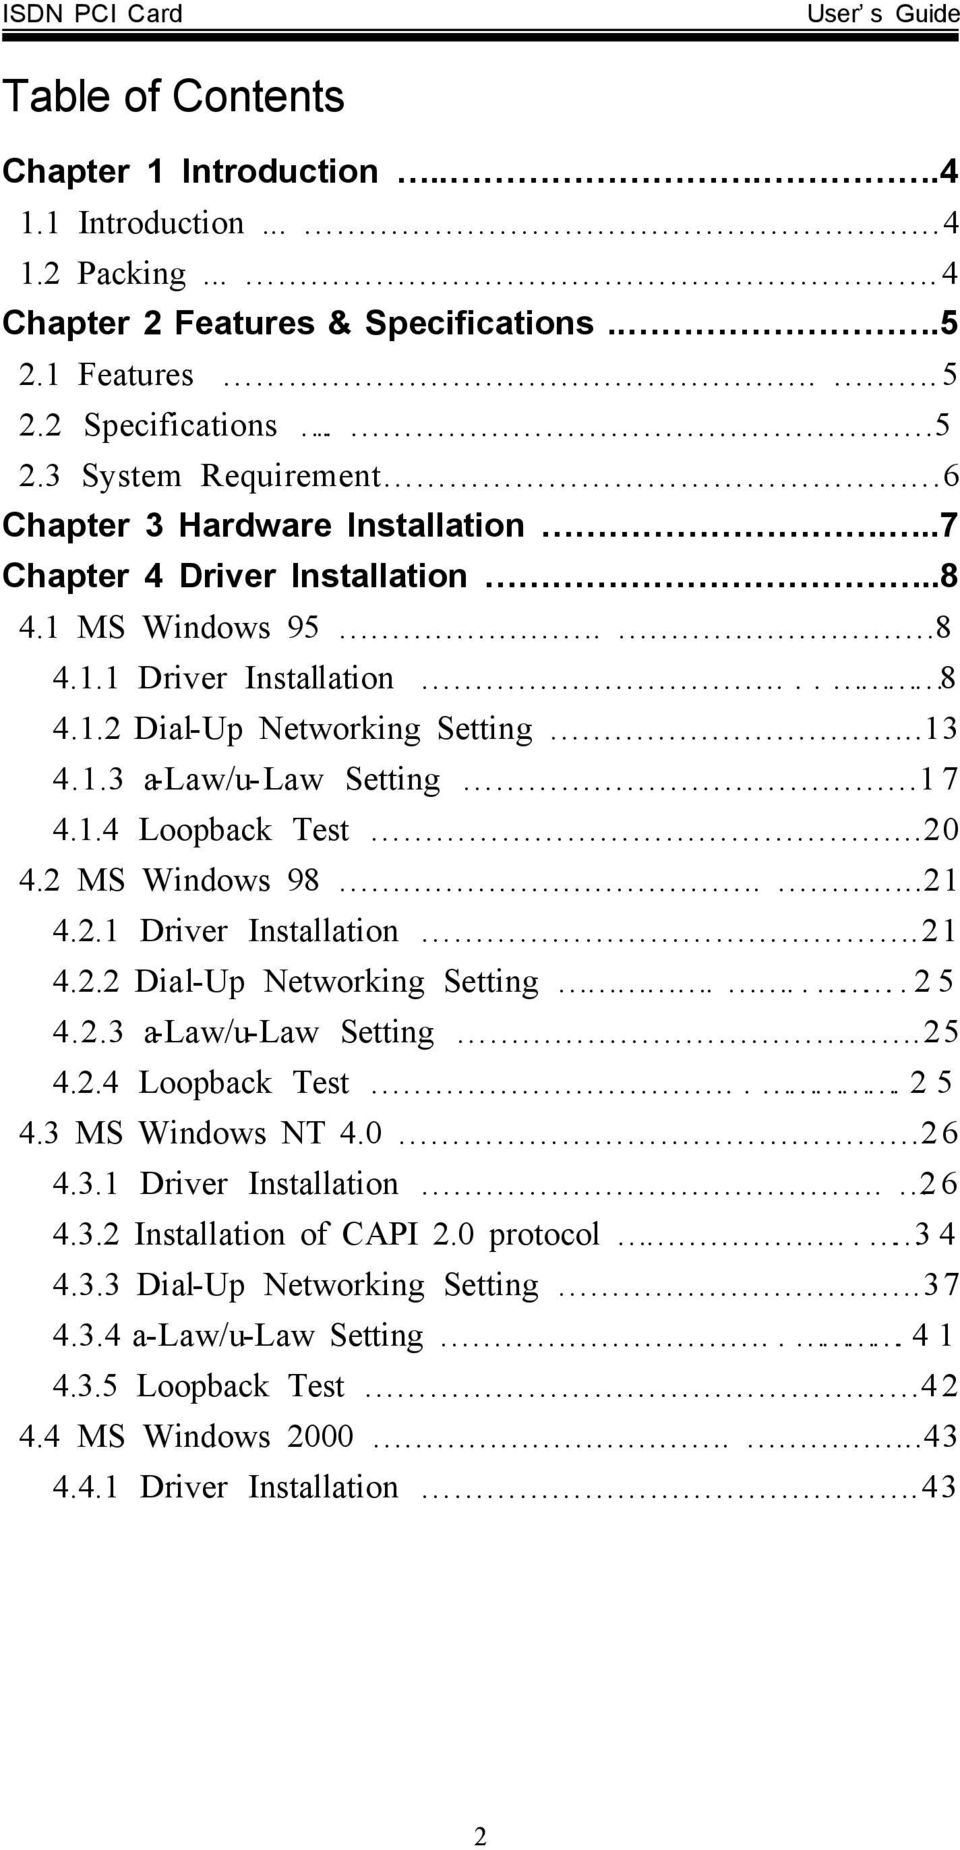 ..20 4.2 MS Windows 98...21 4.2.1 Driver Installation.21 4.2.2 Dial-Up Networking Setting.....25 4.2.3 a-law/u-law Setting.25 4.2.4 Loopback Test...25 4.3 MS Windows NT 4.0 26 4.3.1 Driver Installation. 26 4.3.2 Installation of CAPI 2.